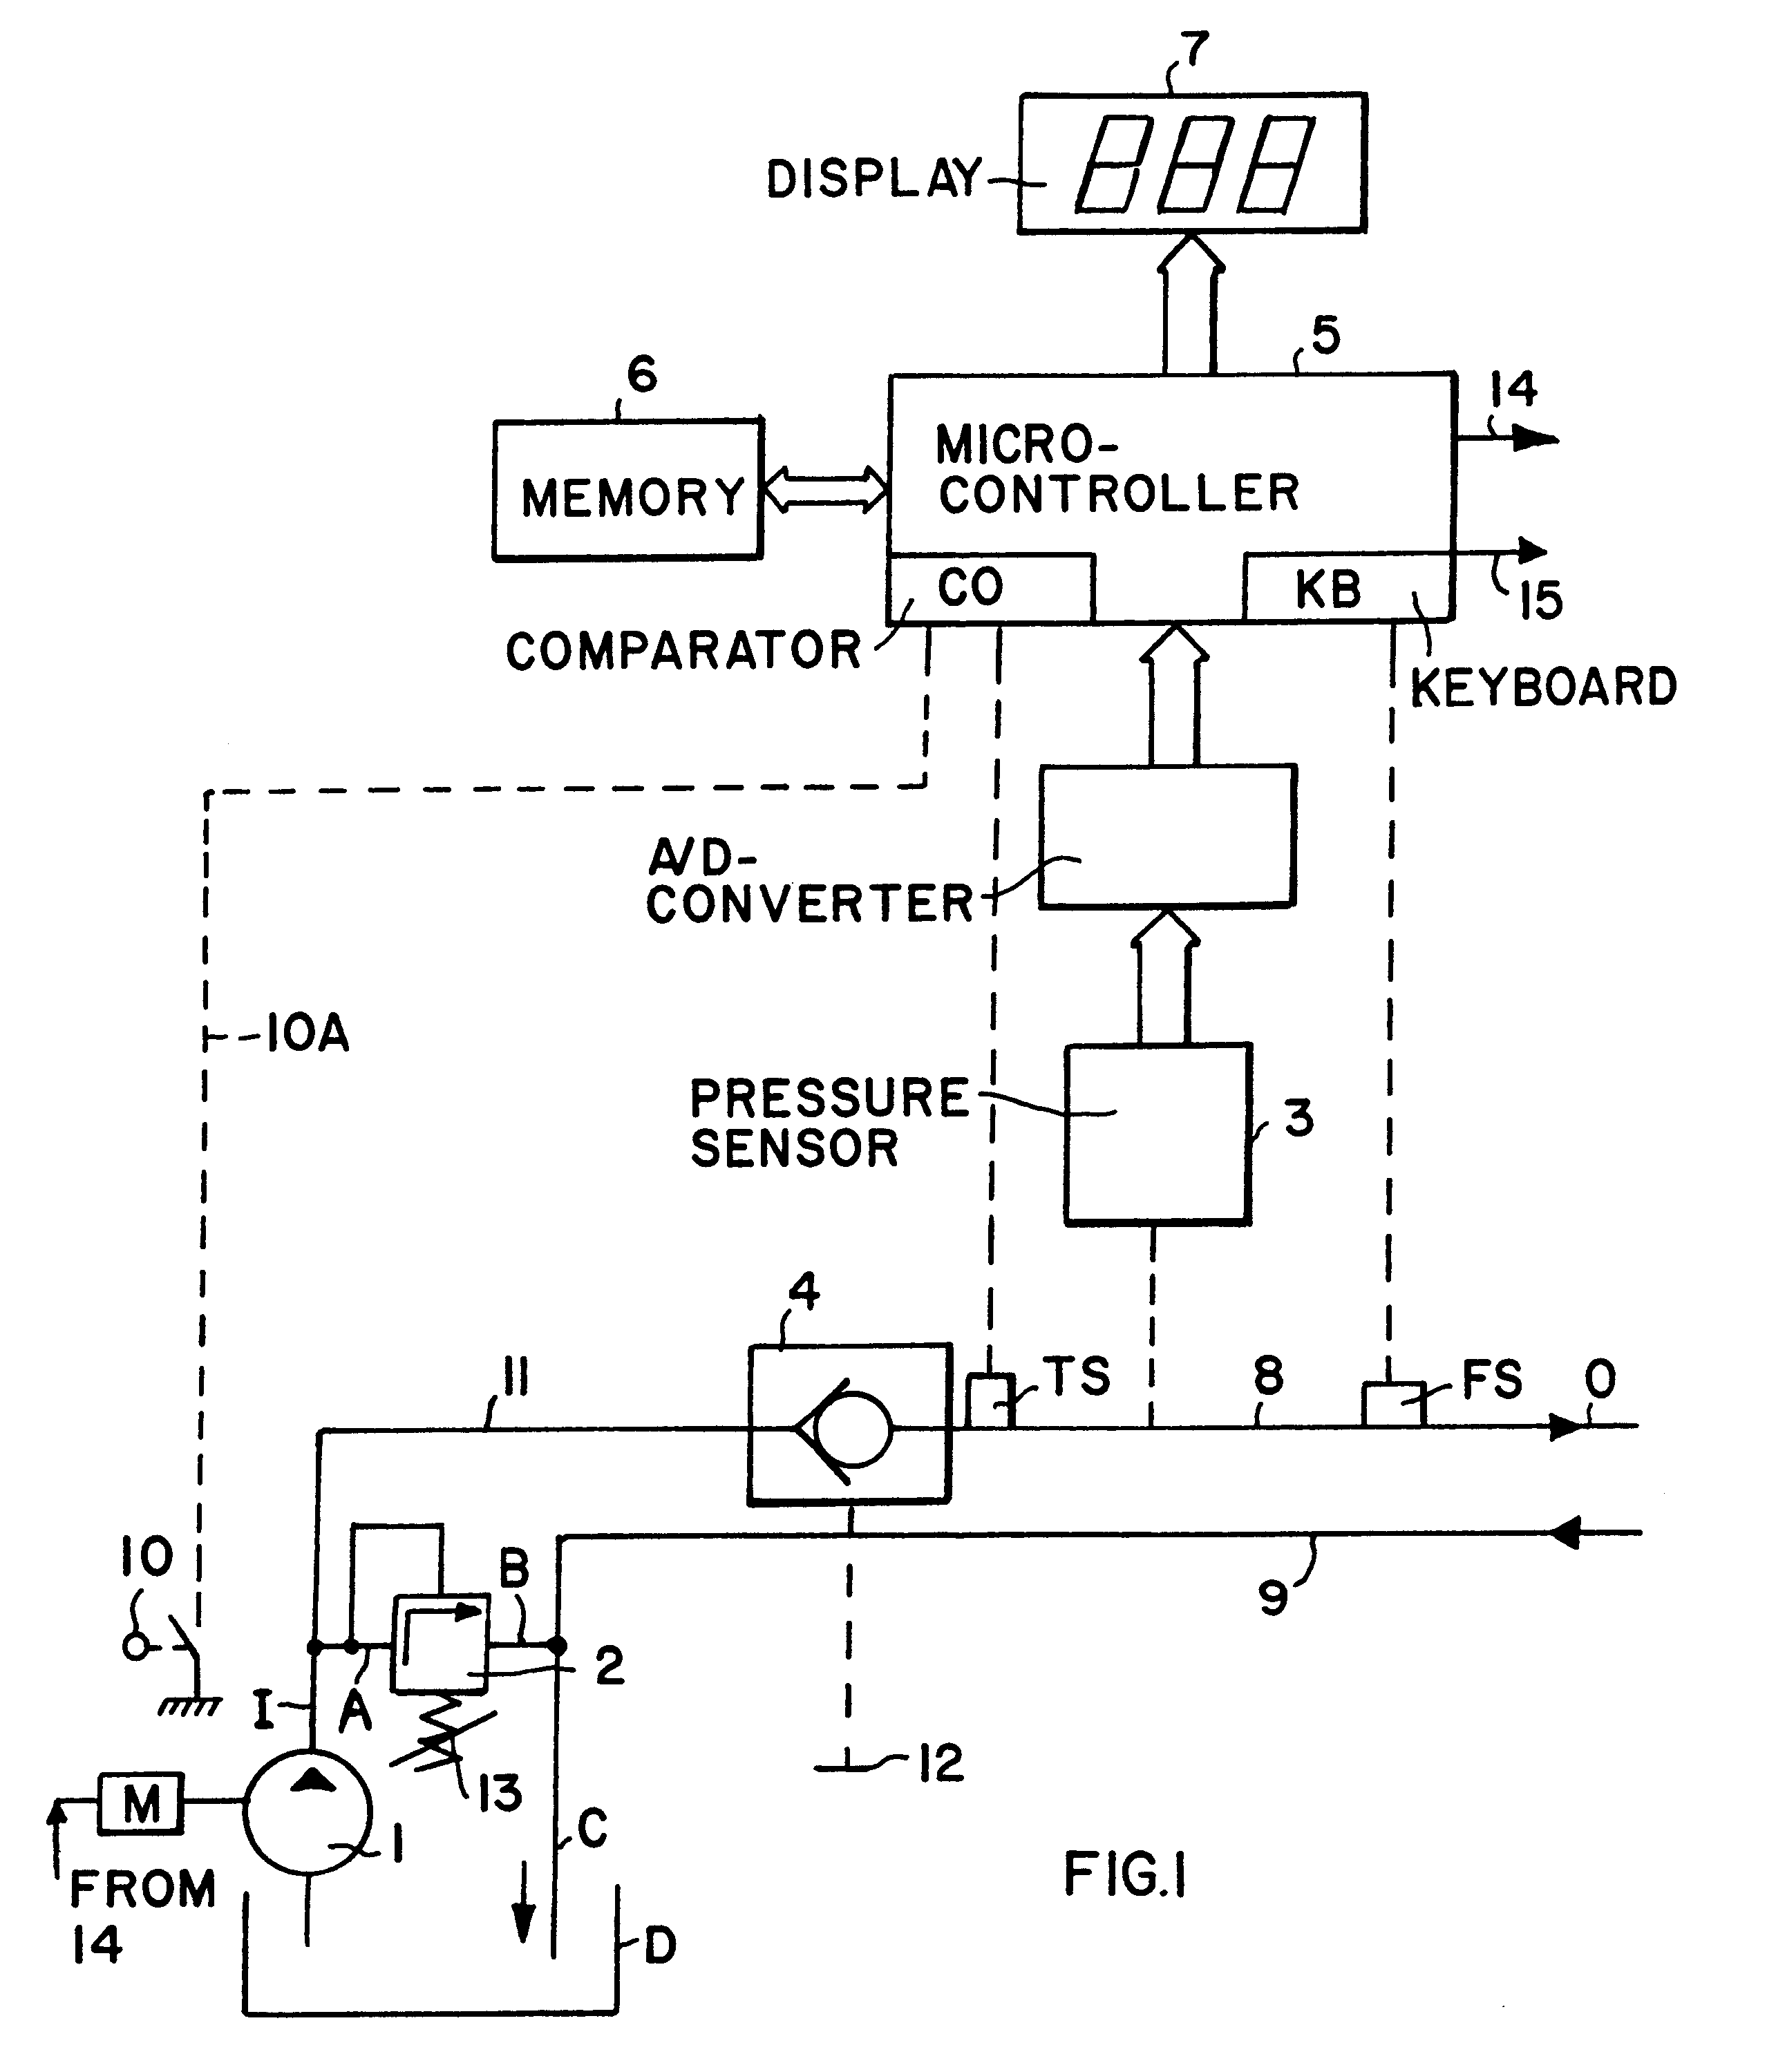 Apparatus and method for controlling a rated system pressure